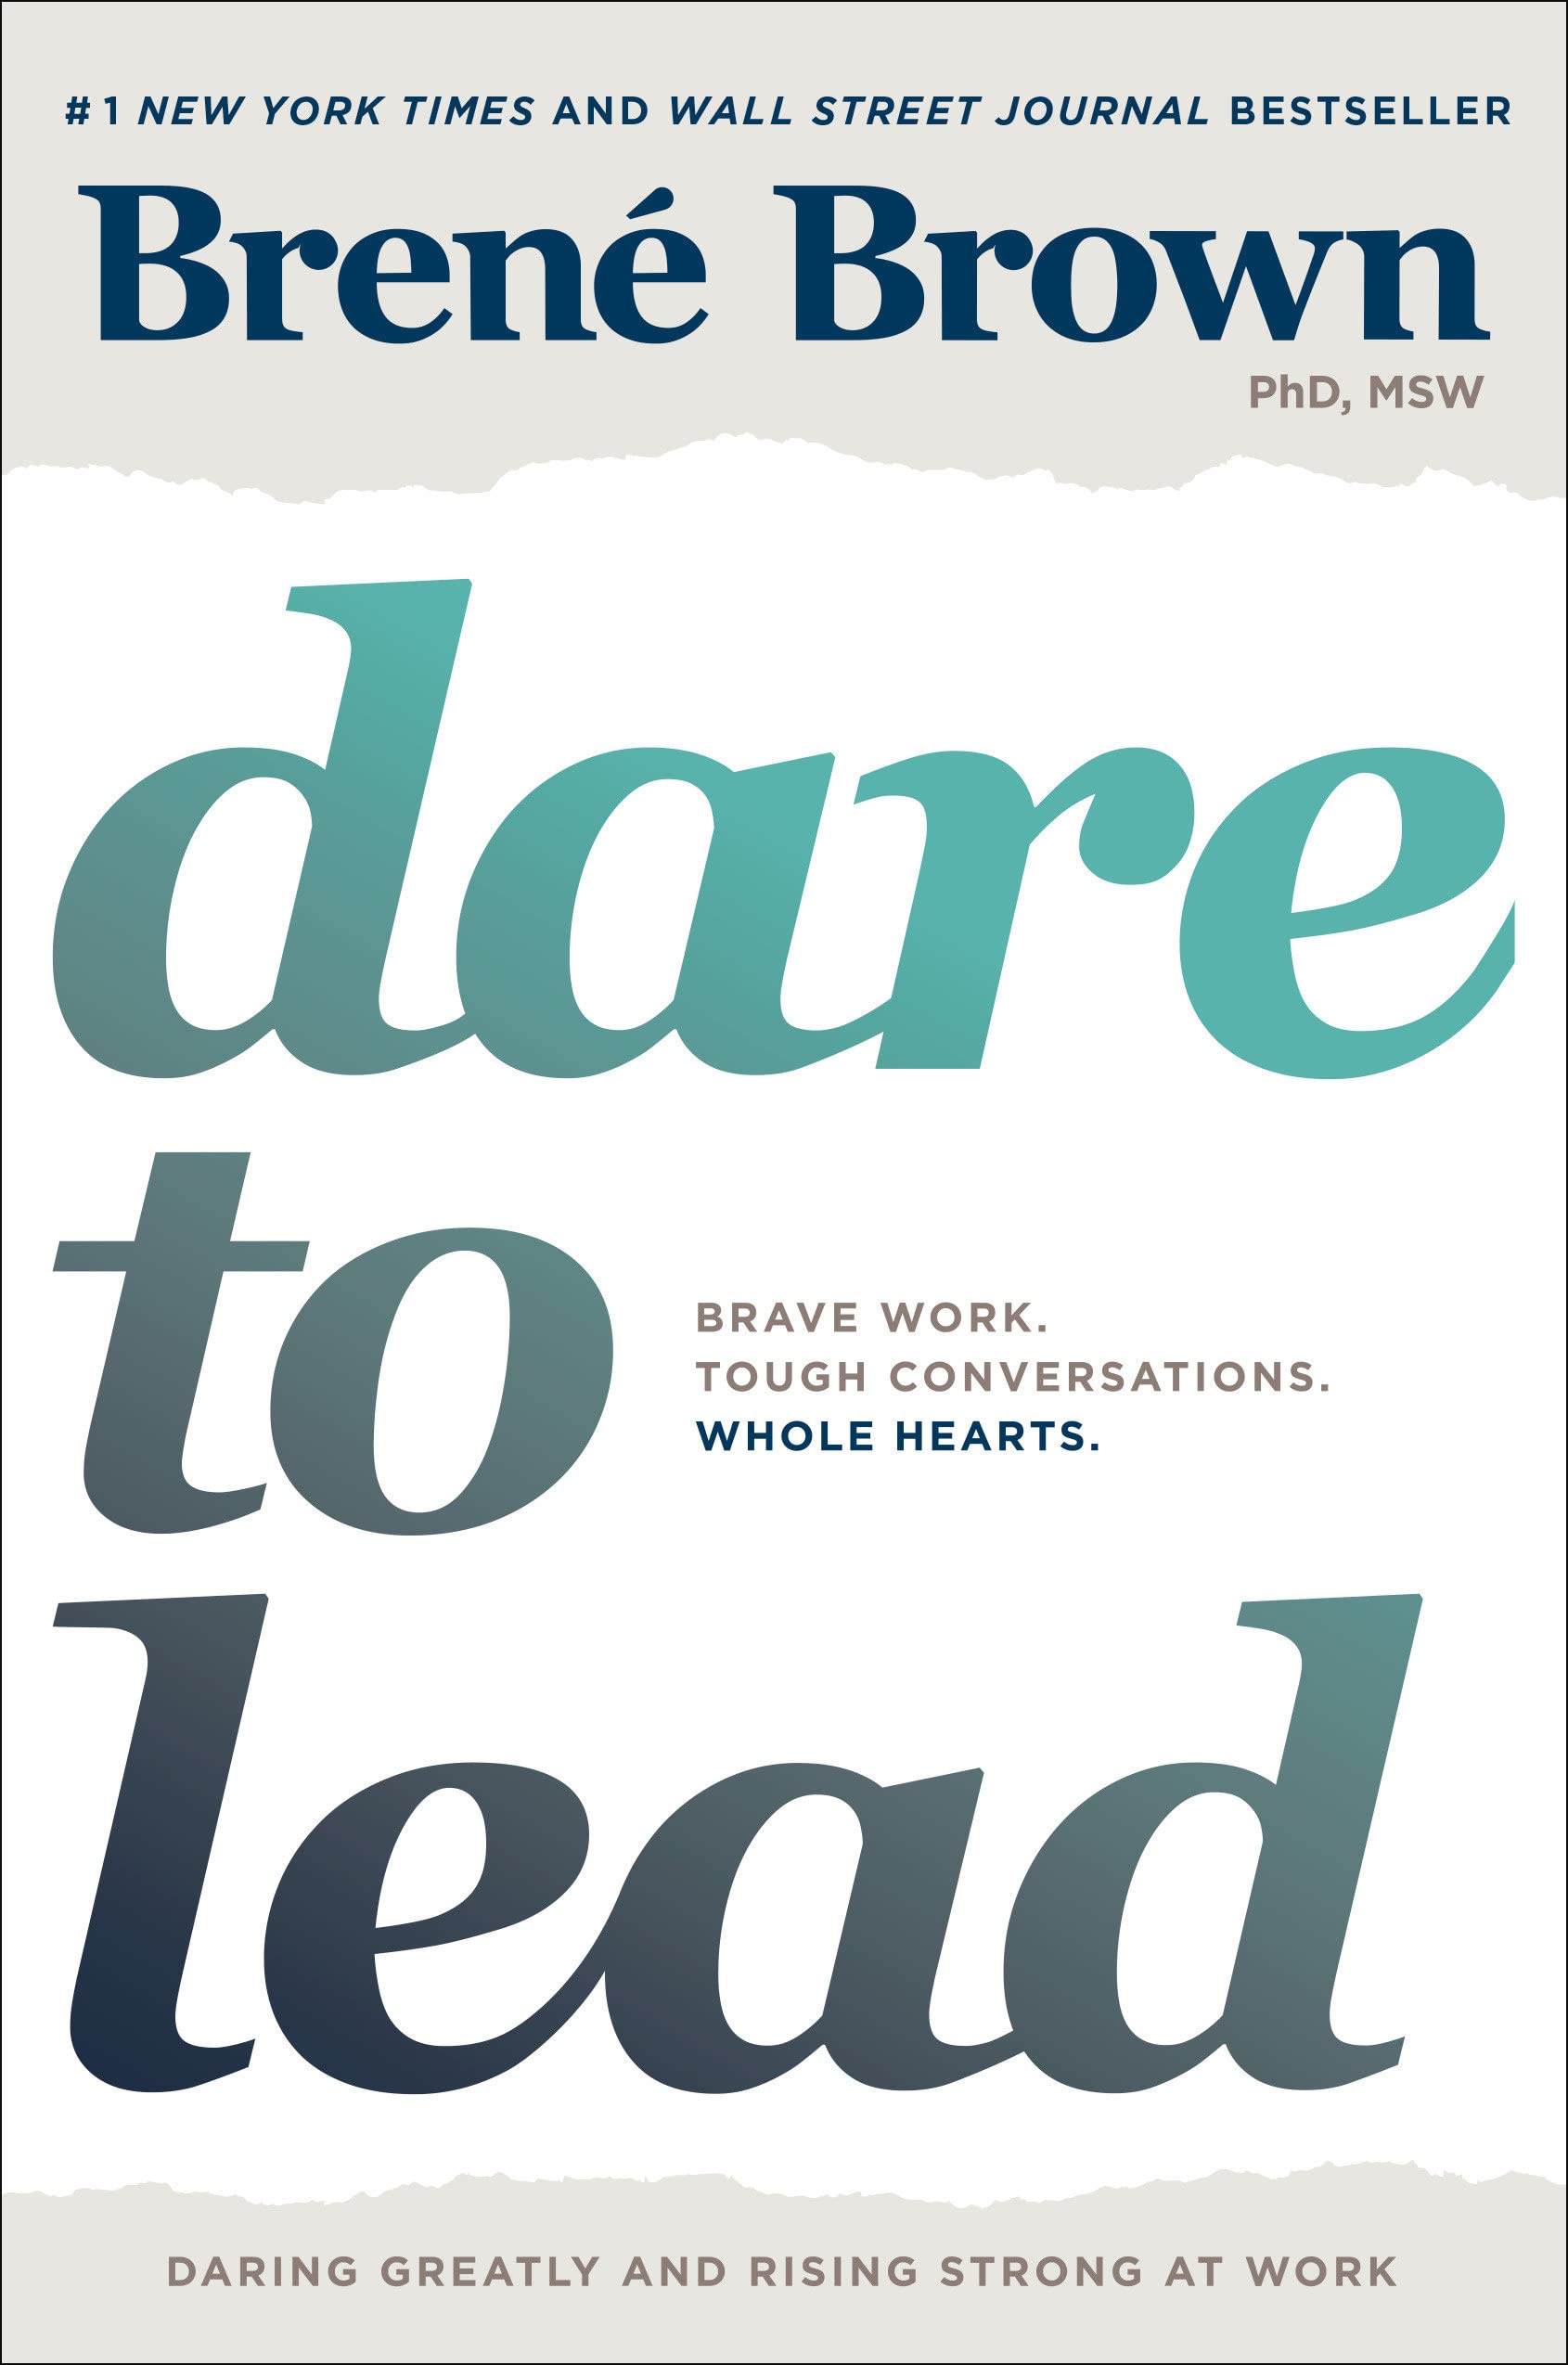 The cover of Dare to Lead by Brene Brown